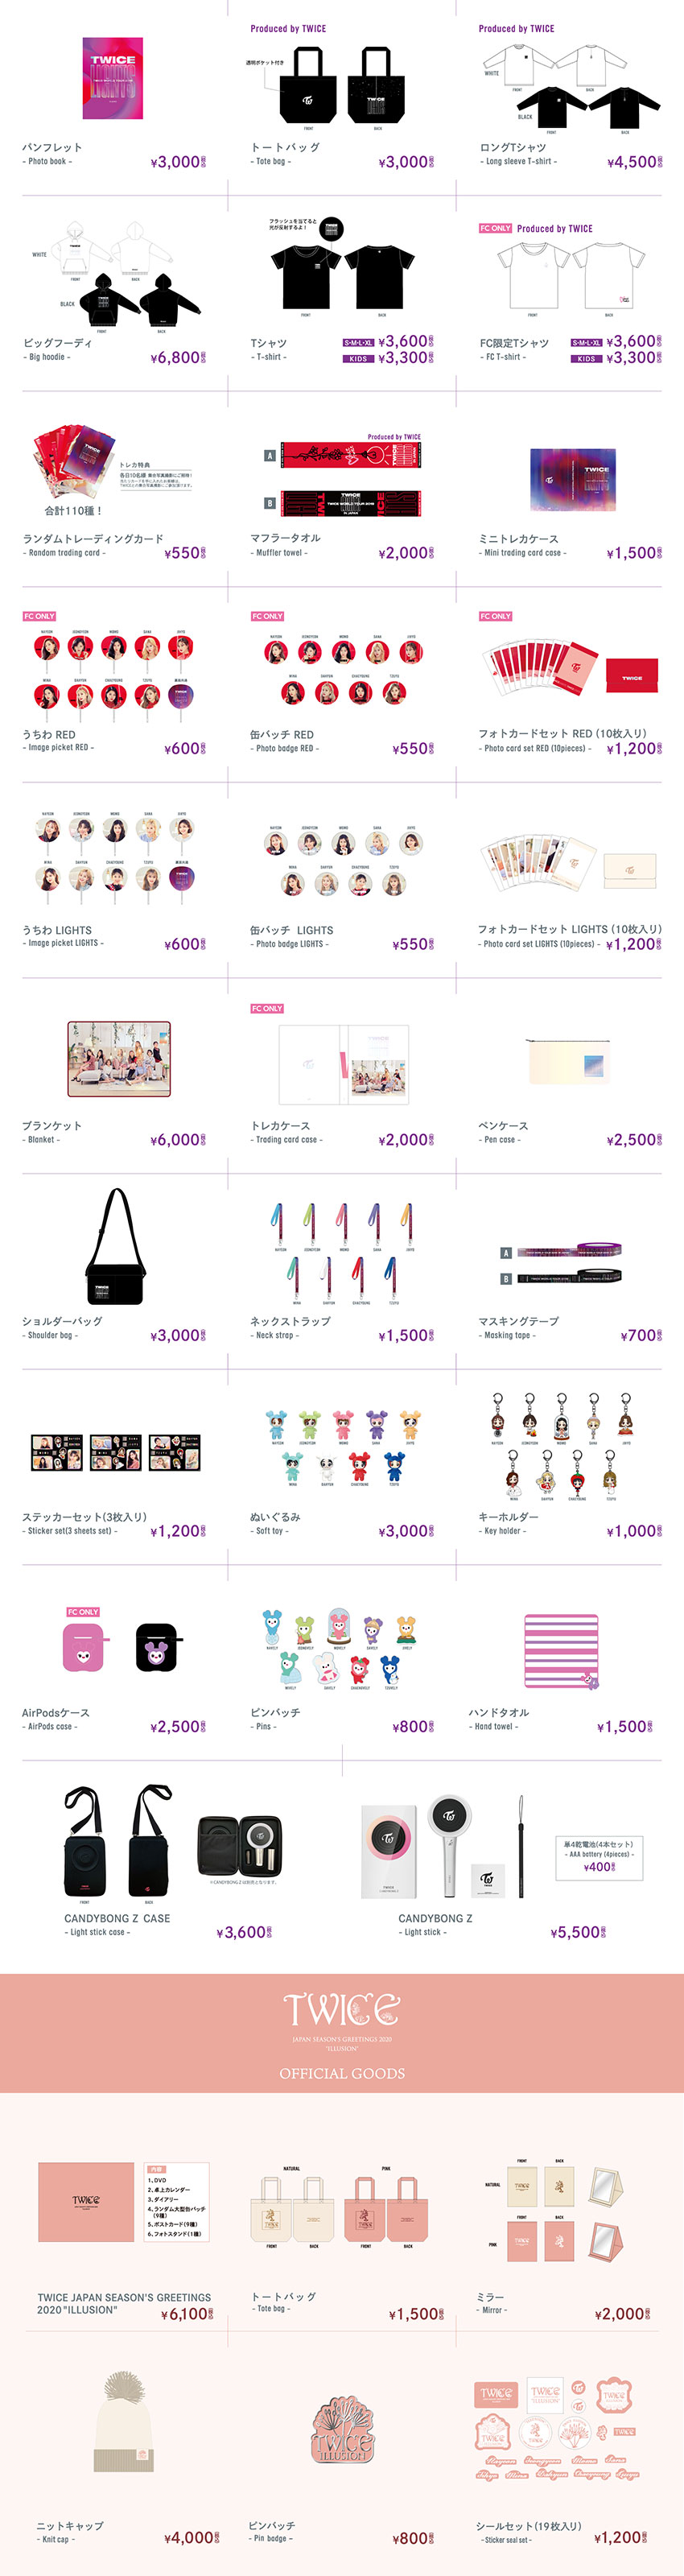 TWICE WORLD TOUR 2019'TWICELIGHTS'IN JAPAN｜TWICE OFFICIAL SITE